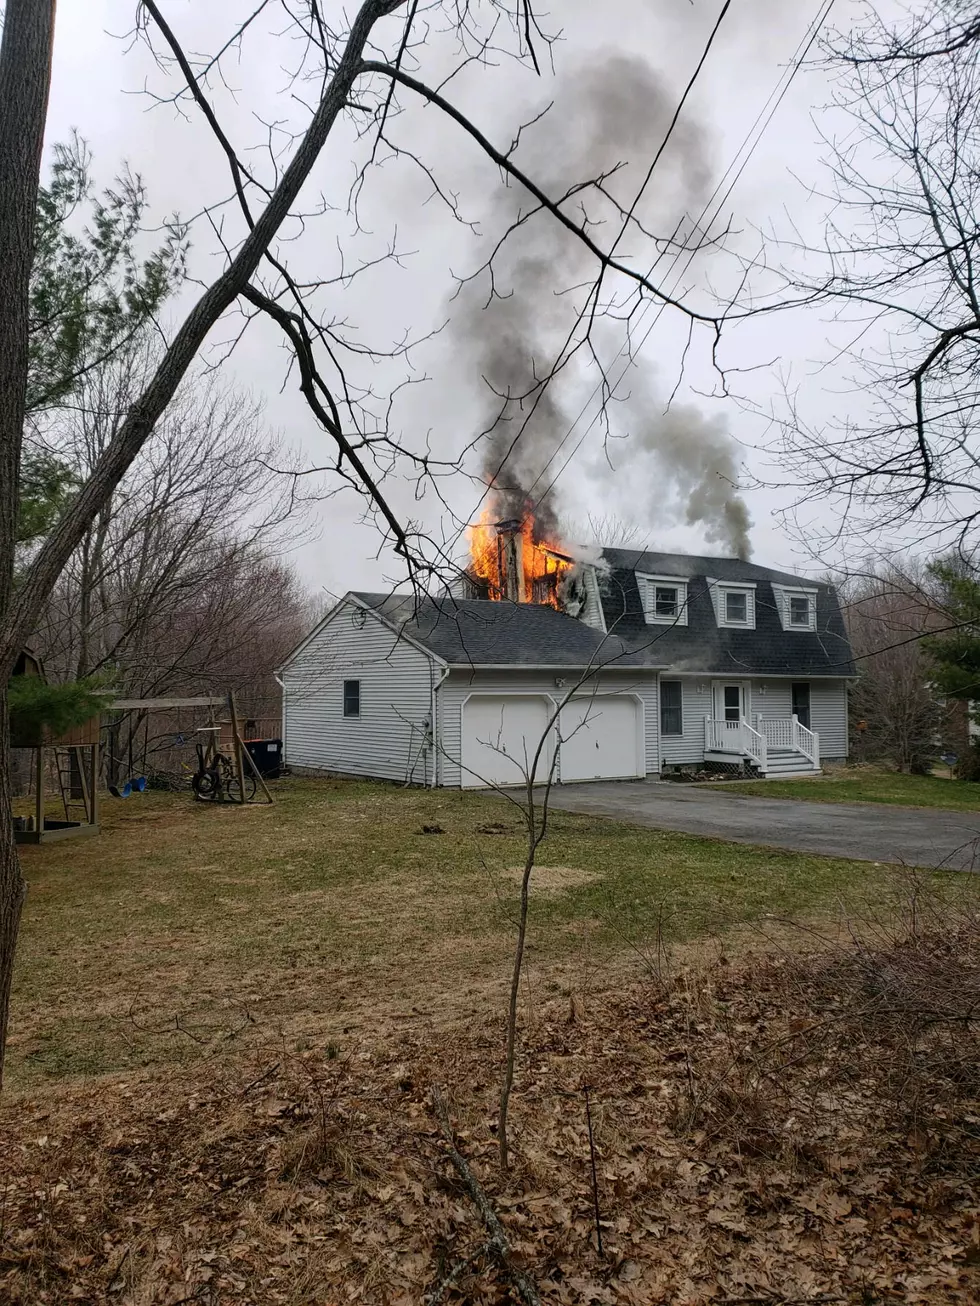 Dutchess County Family Loses Home After Fire